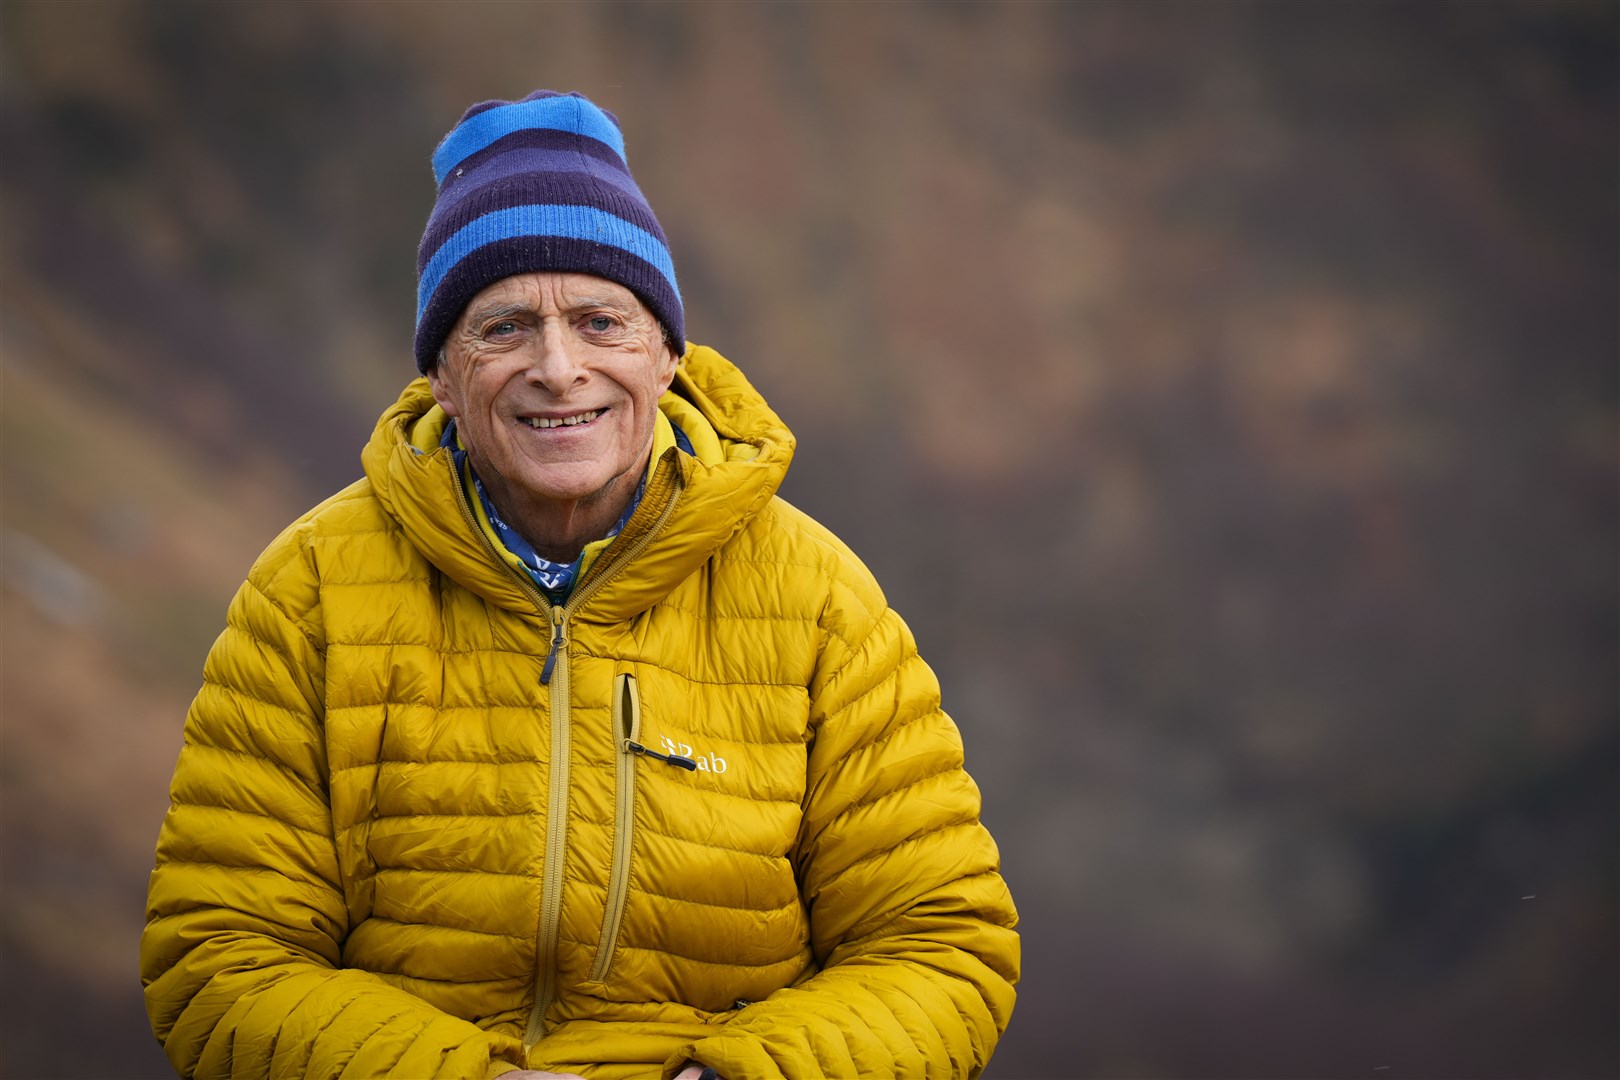 David ‘Heavy’ Whalley is the latest to receive the Scottish Award for Excellence in Mountain Culture. Picture: Dave Macleod